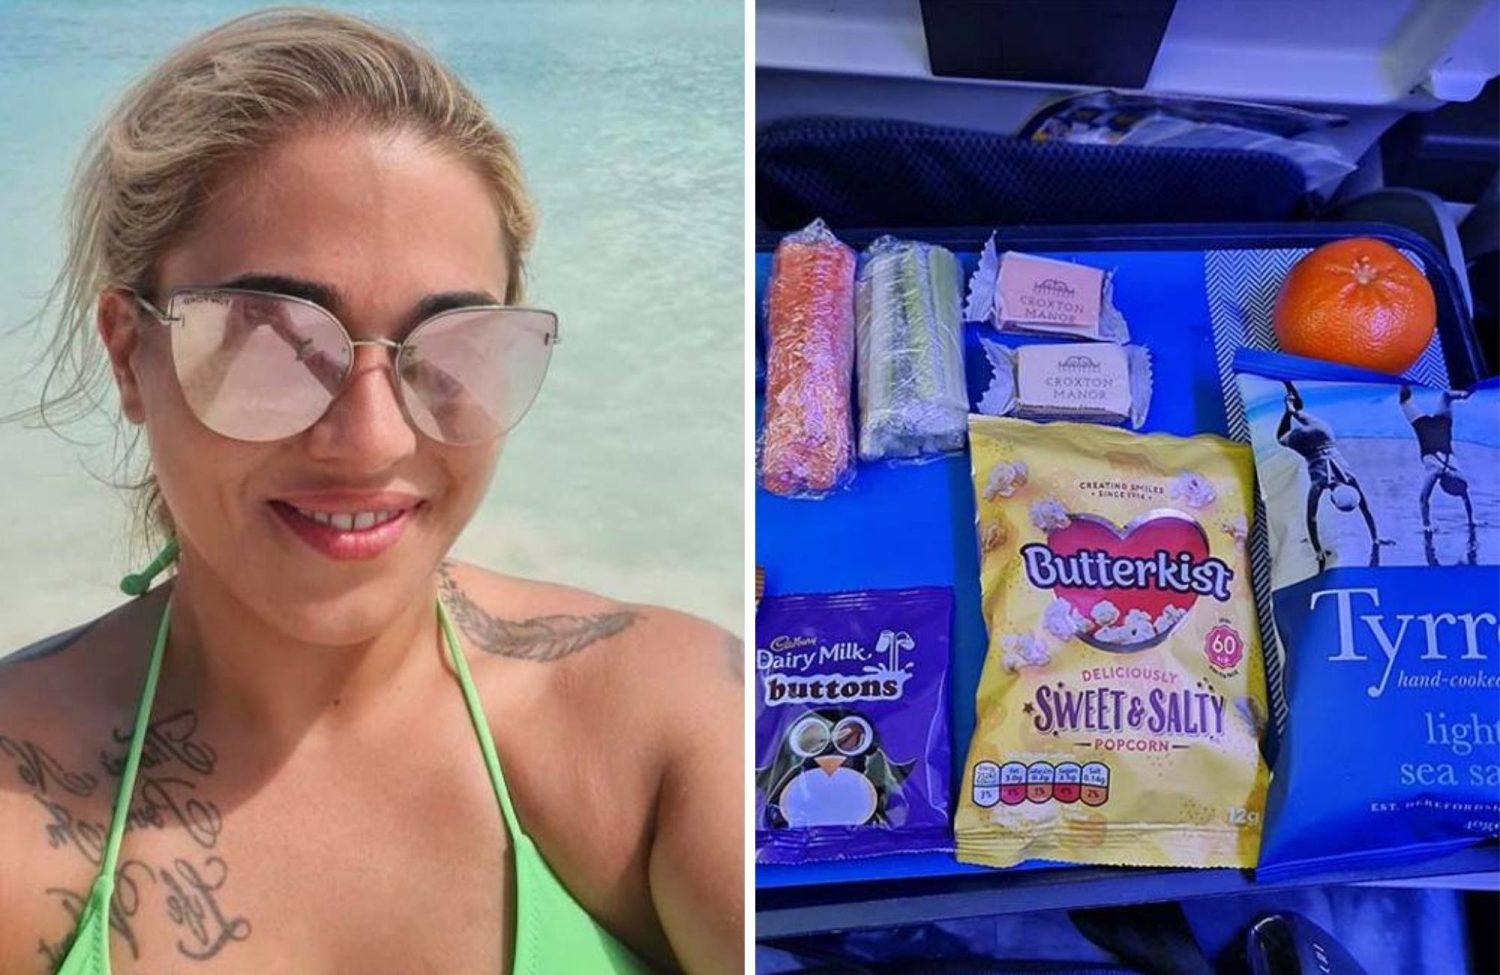 Woman Says Holiday Was Ruined After She Was Left "starving" On Nine-hour Flight